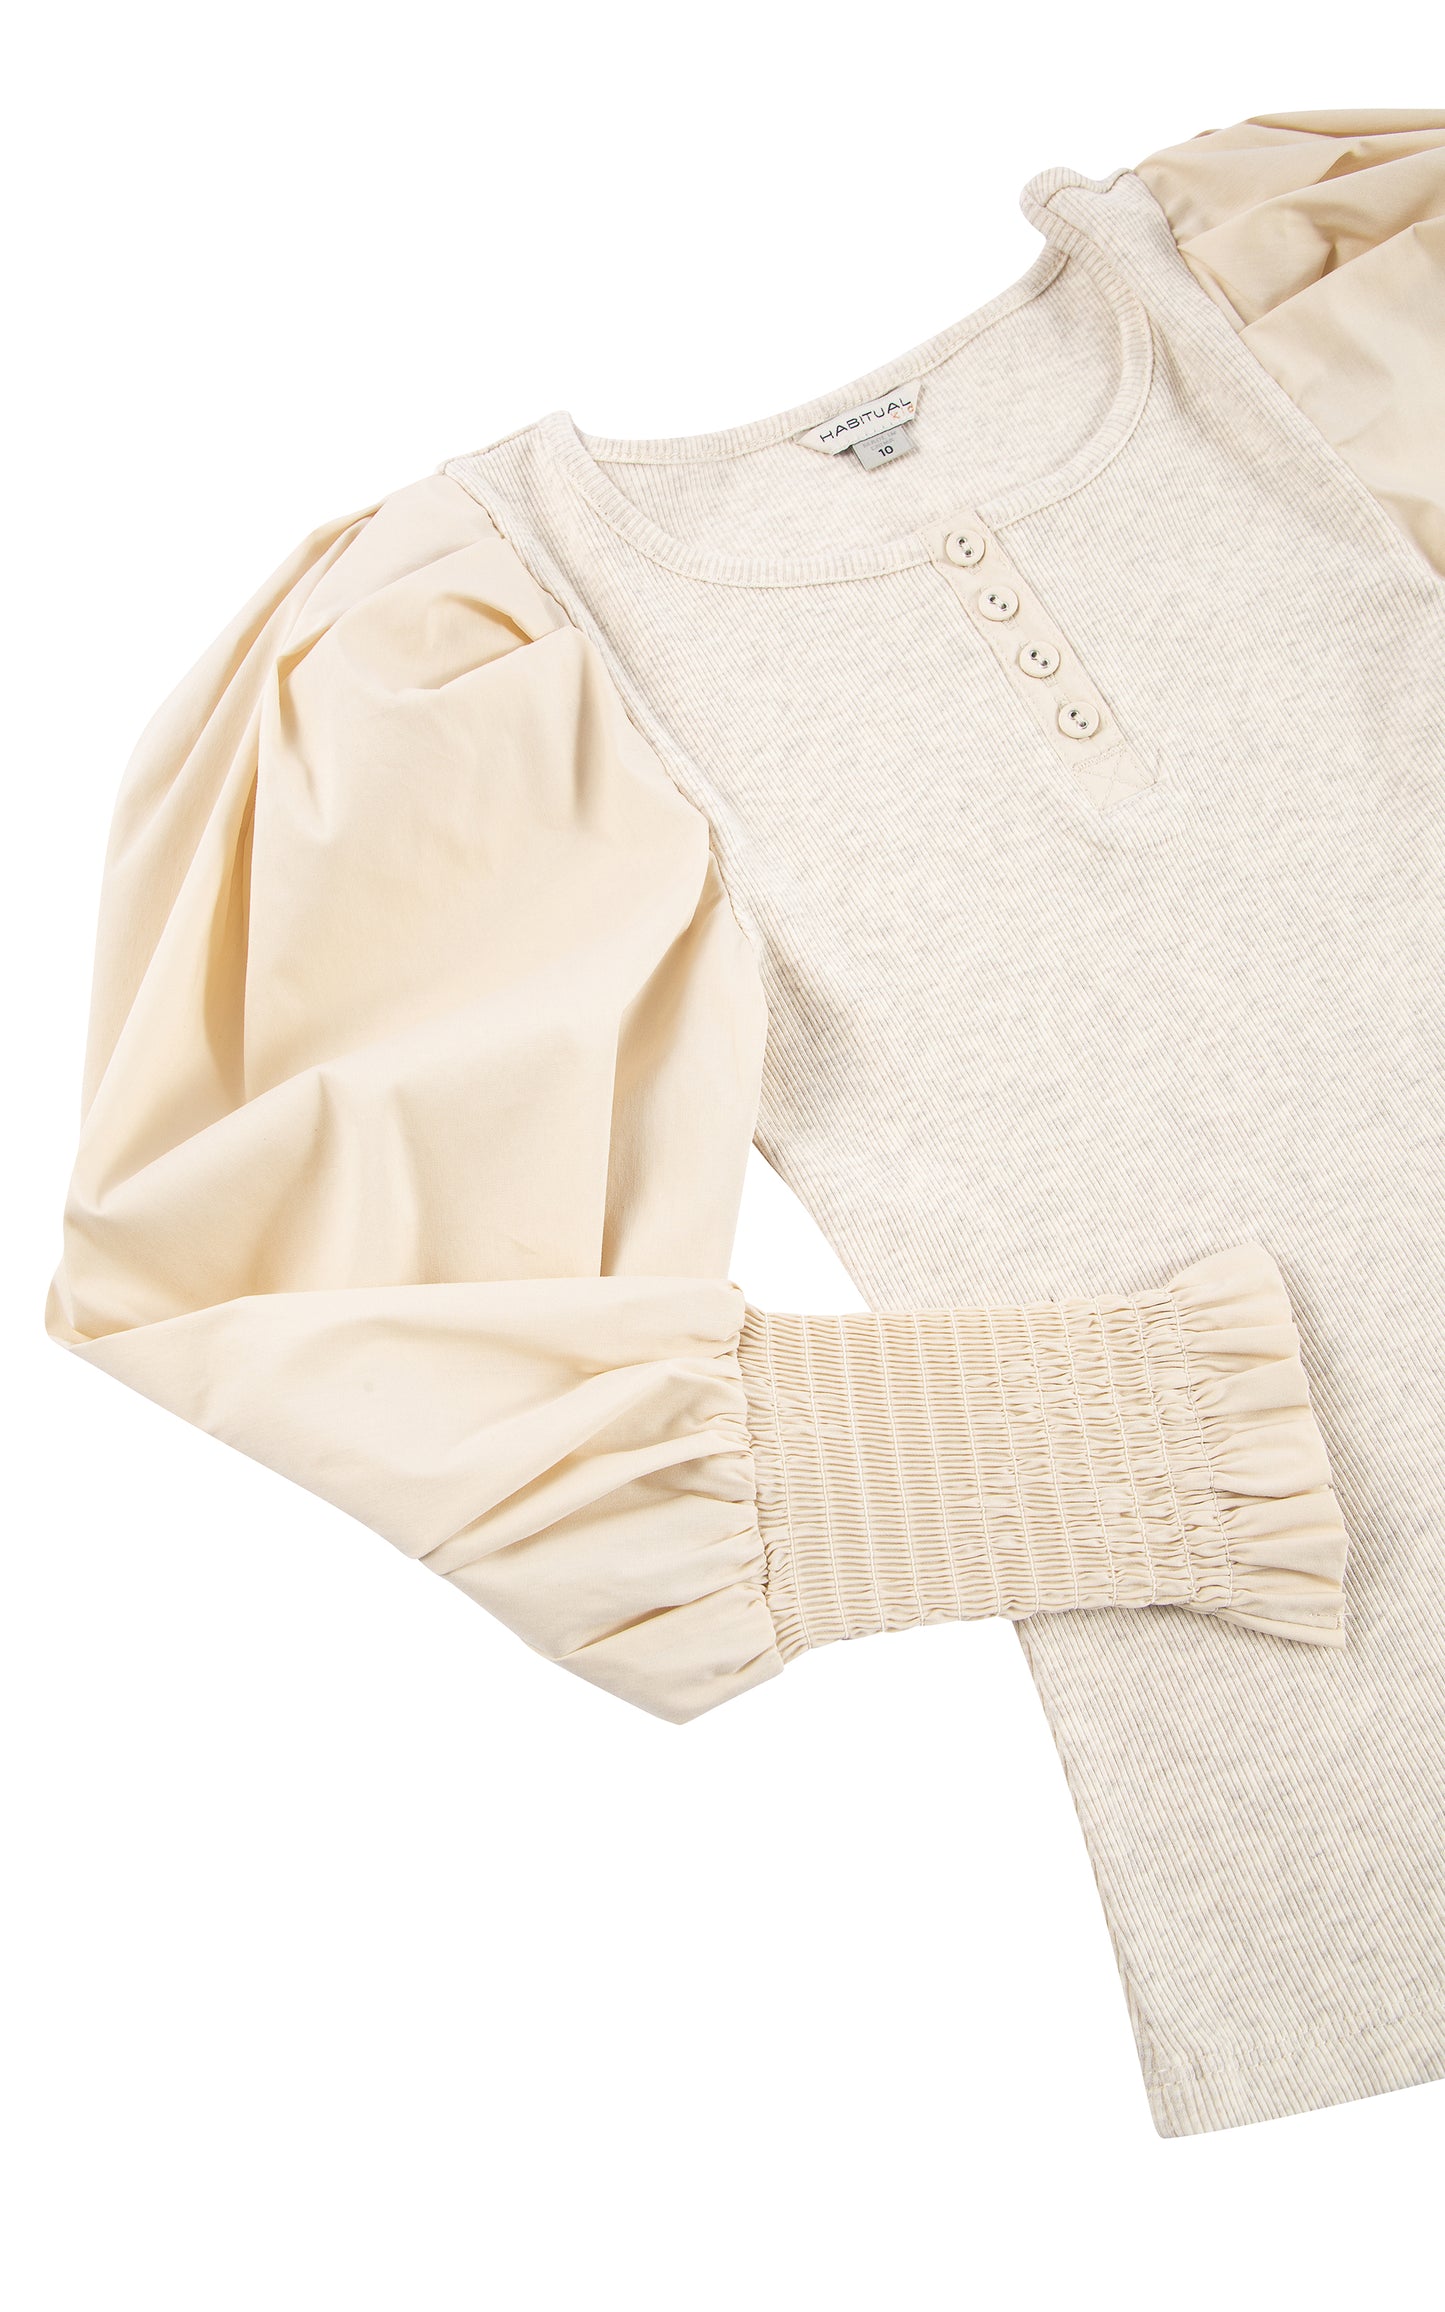 CLOSE UP OF OATMEAL LONG-SLEEVE TOP WITH FOUR BUTTONS AT THE COLLAR, PUFFY SLEEVES, AND SMOCKED CUFFS